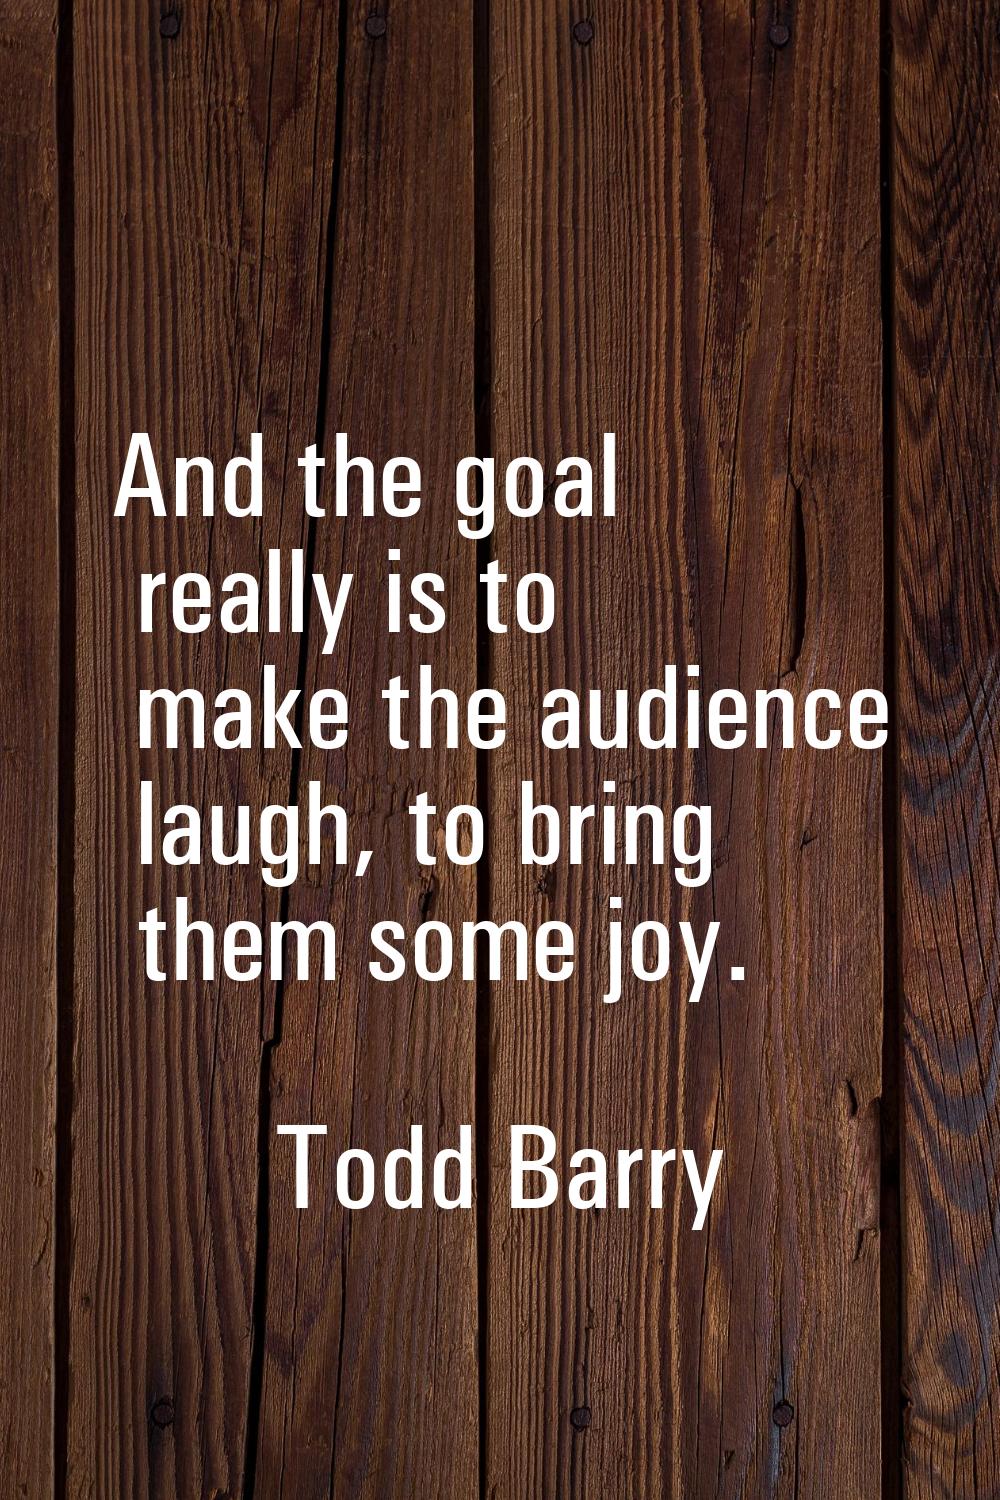 And the goal really is to make the audience laugh, to bring them some joy.